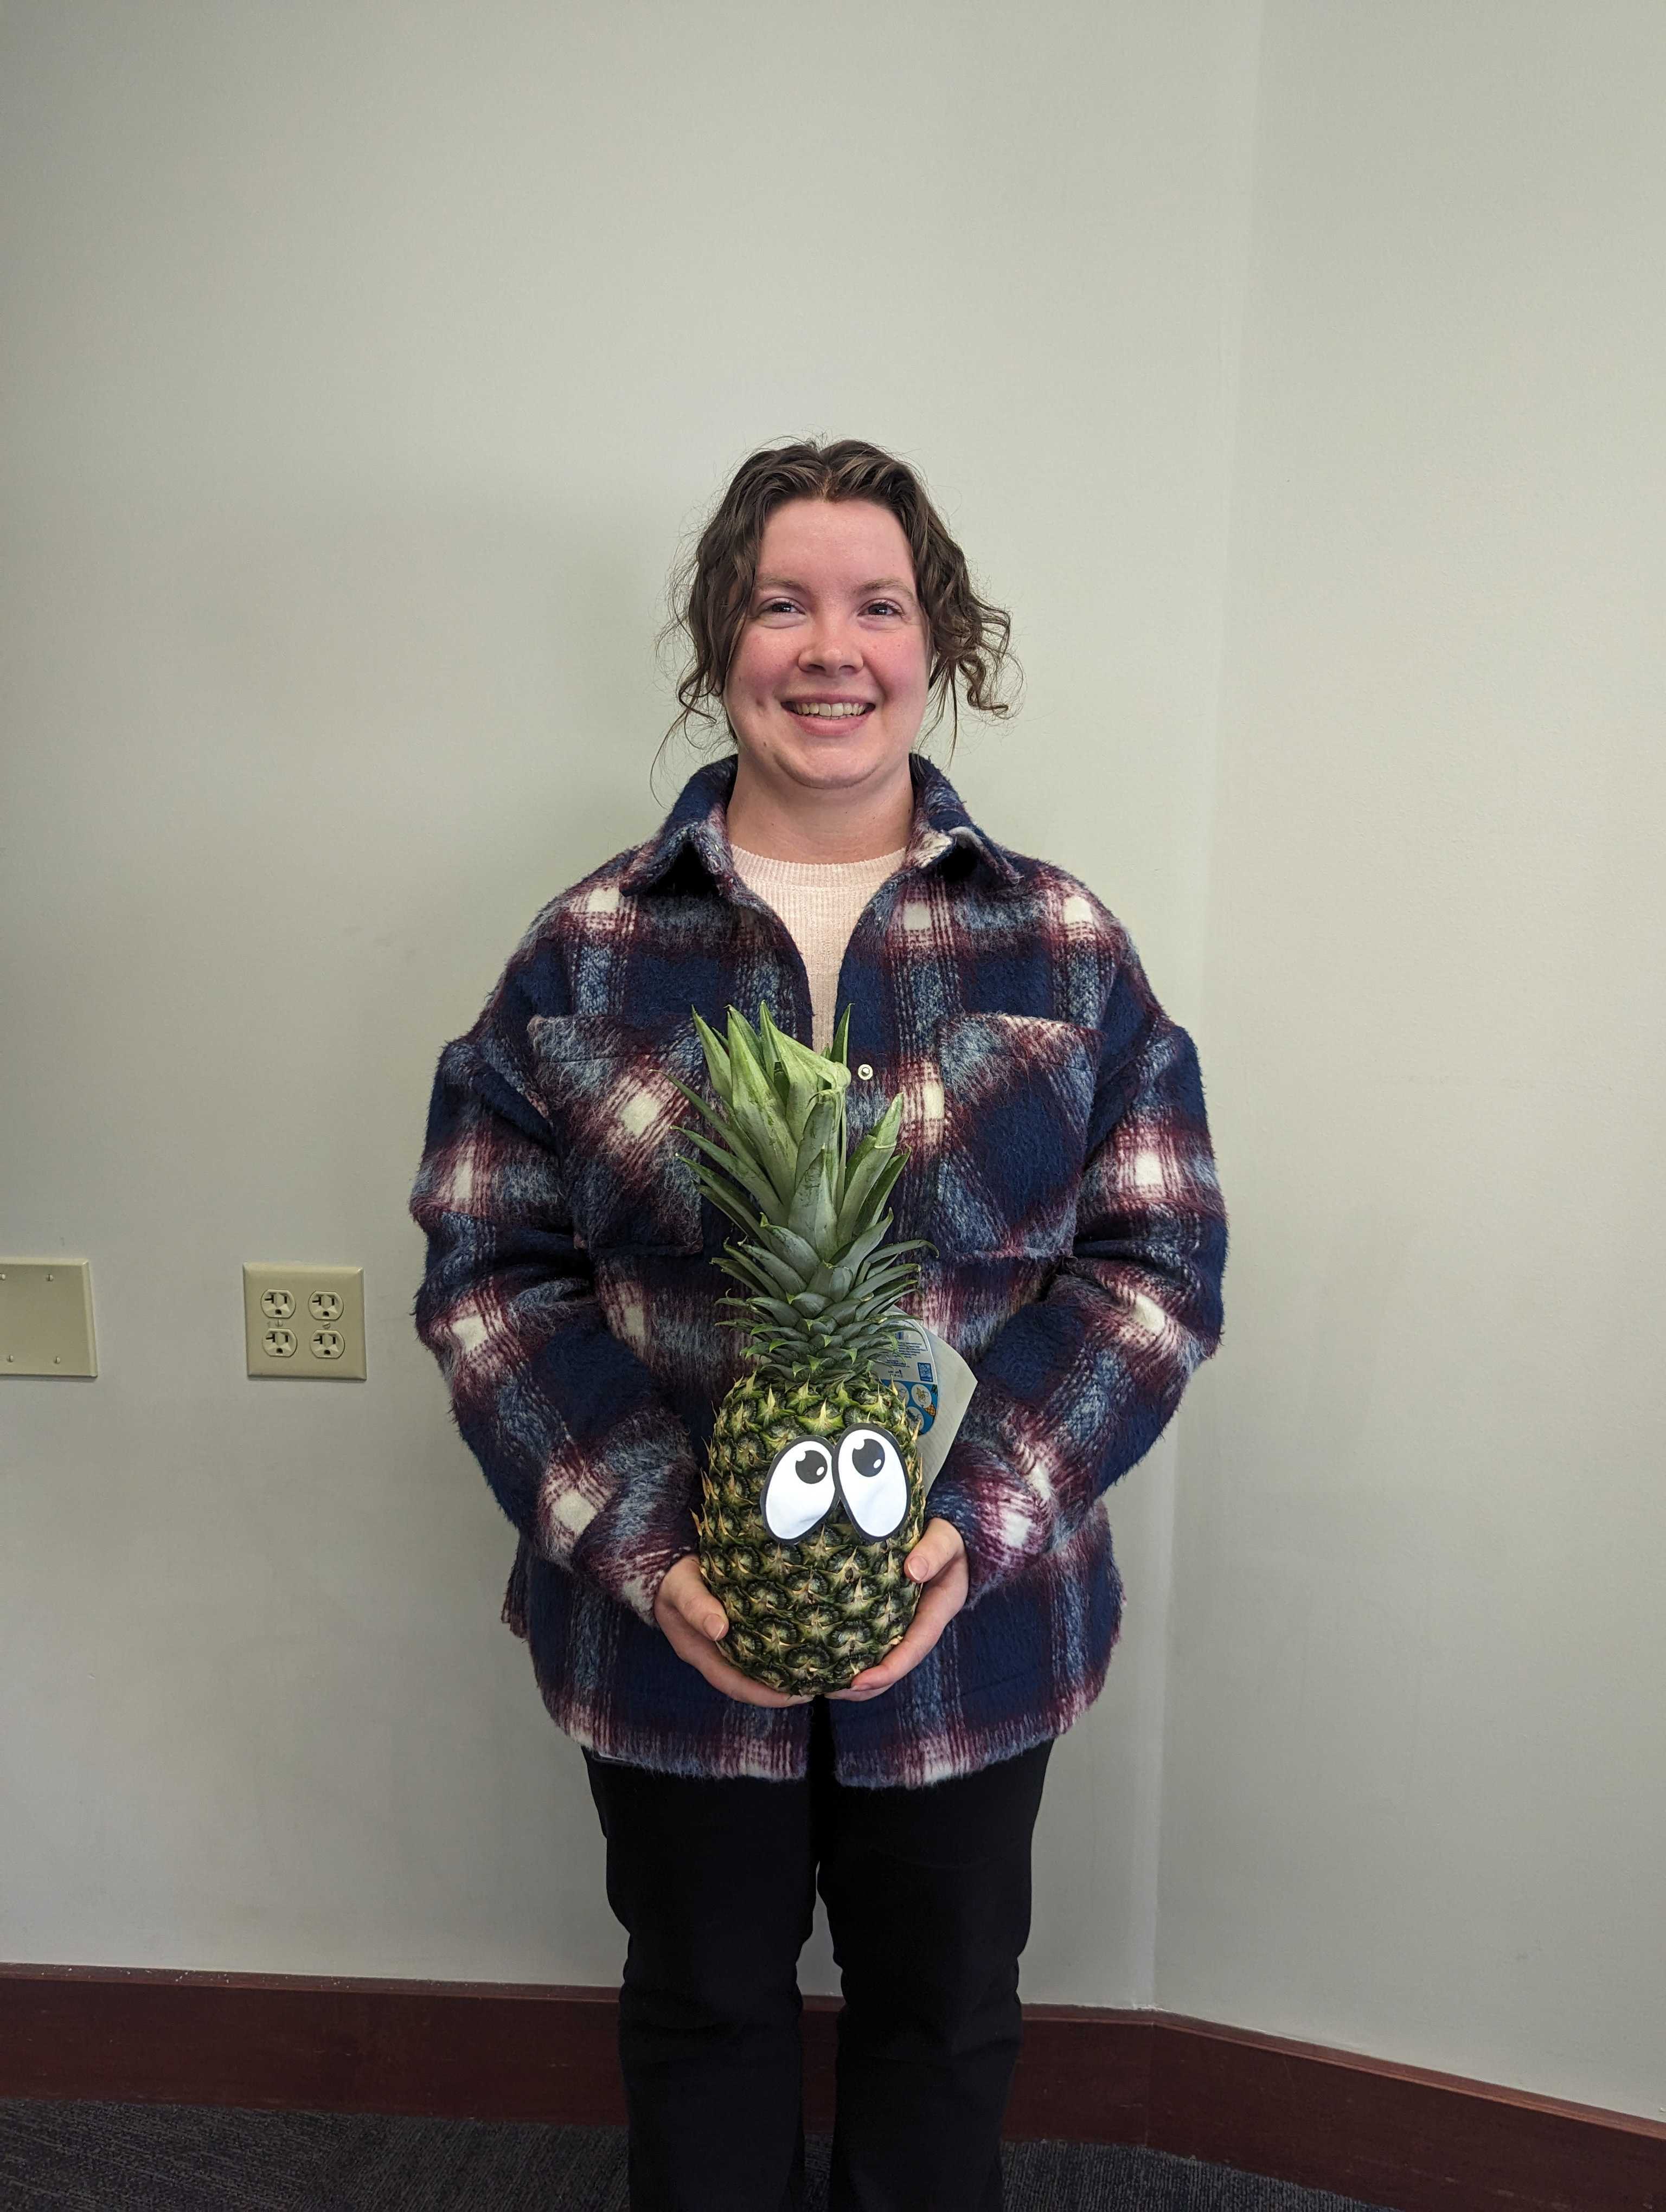 Faculty member Lacie Stiffler poses with a pineapple to signify graduation from ATLS.